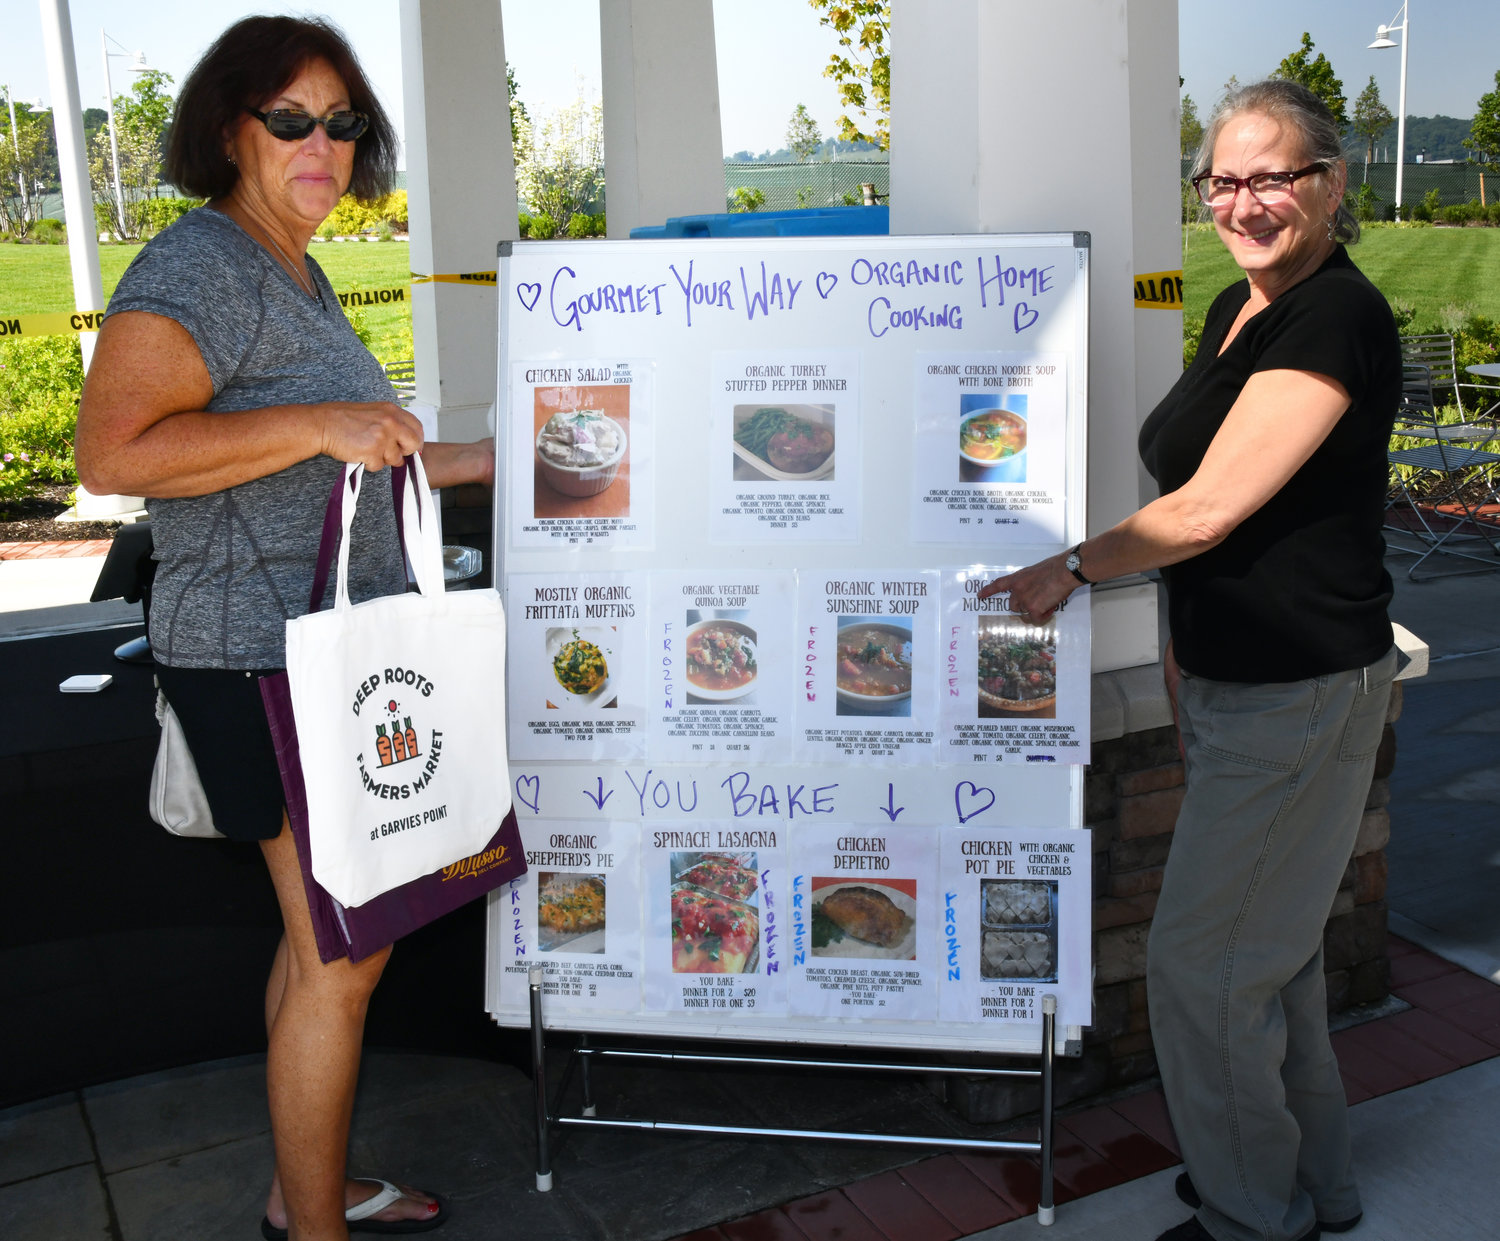 Maureen Hauser and chef Alison Prudente looked over Prudente’s menu for Gourmet Your Way organic home cooking